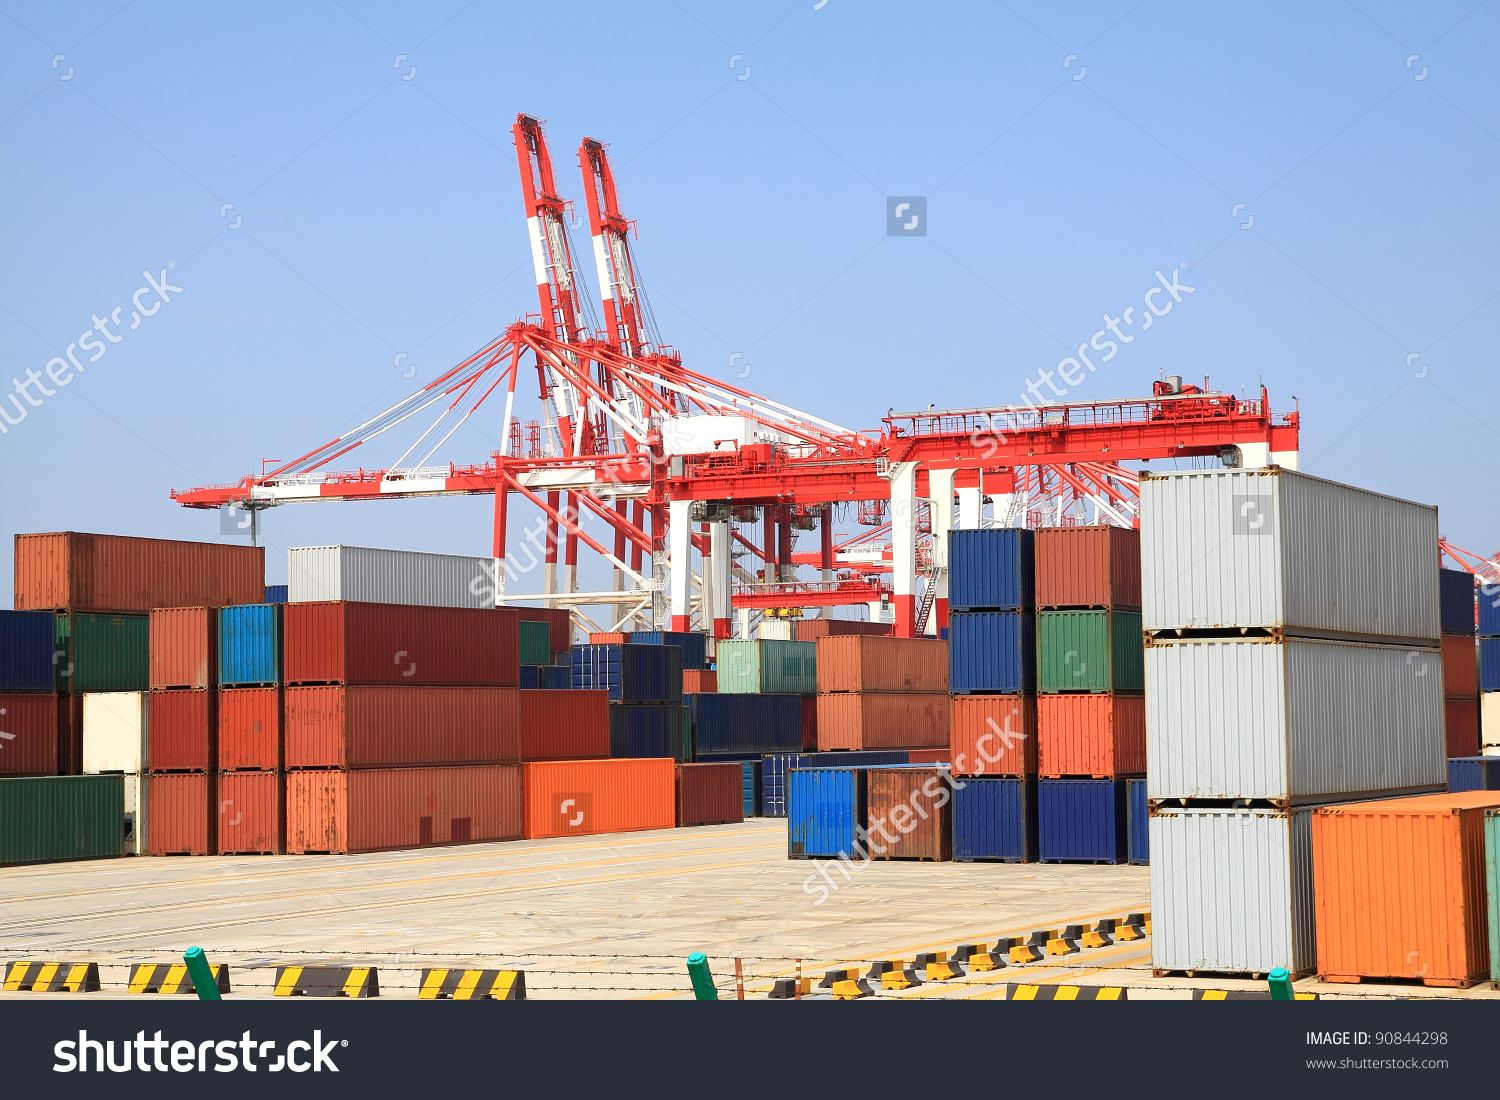 Trading Port Cranes And Container Storage Stock Photo 90844298.